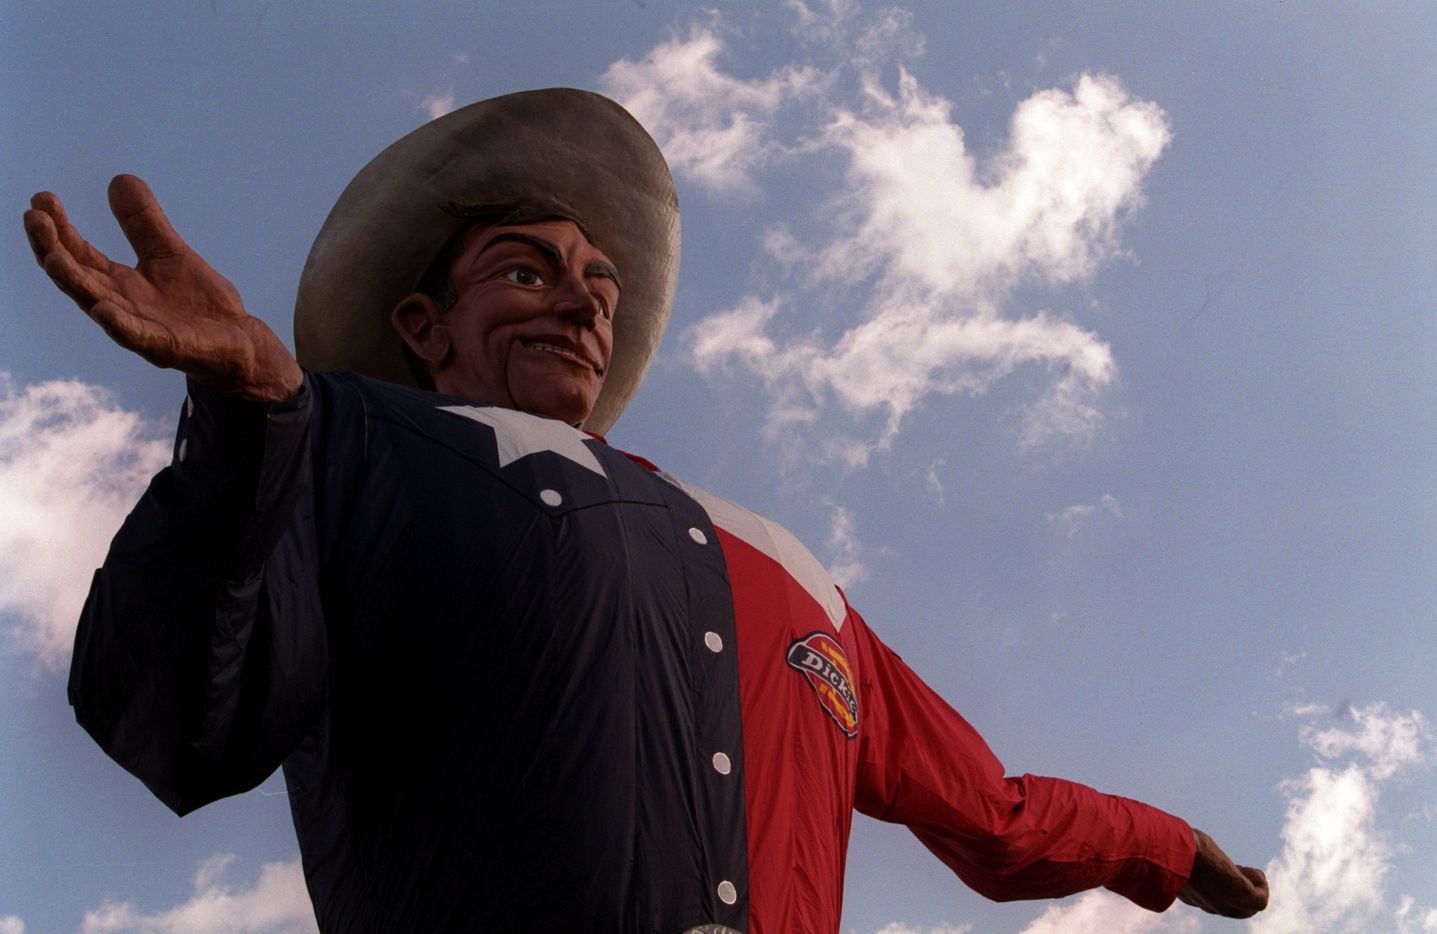 Big Tex in 2002, his 50th year at the State Fair of Texas.